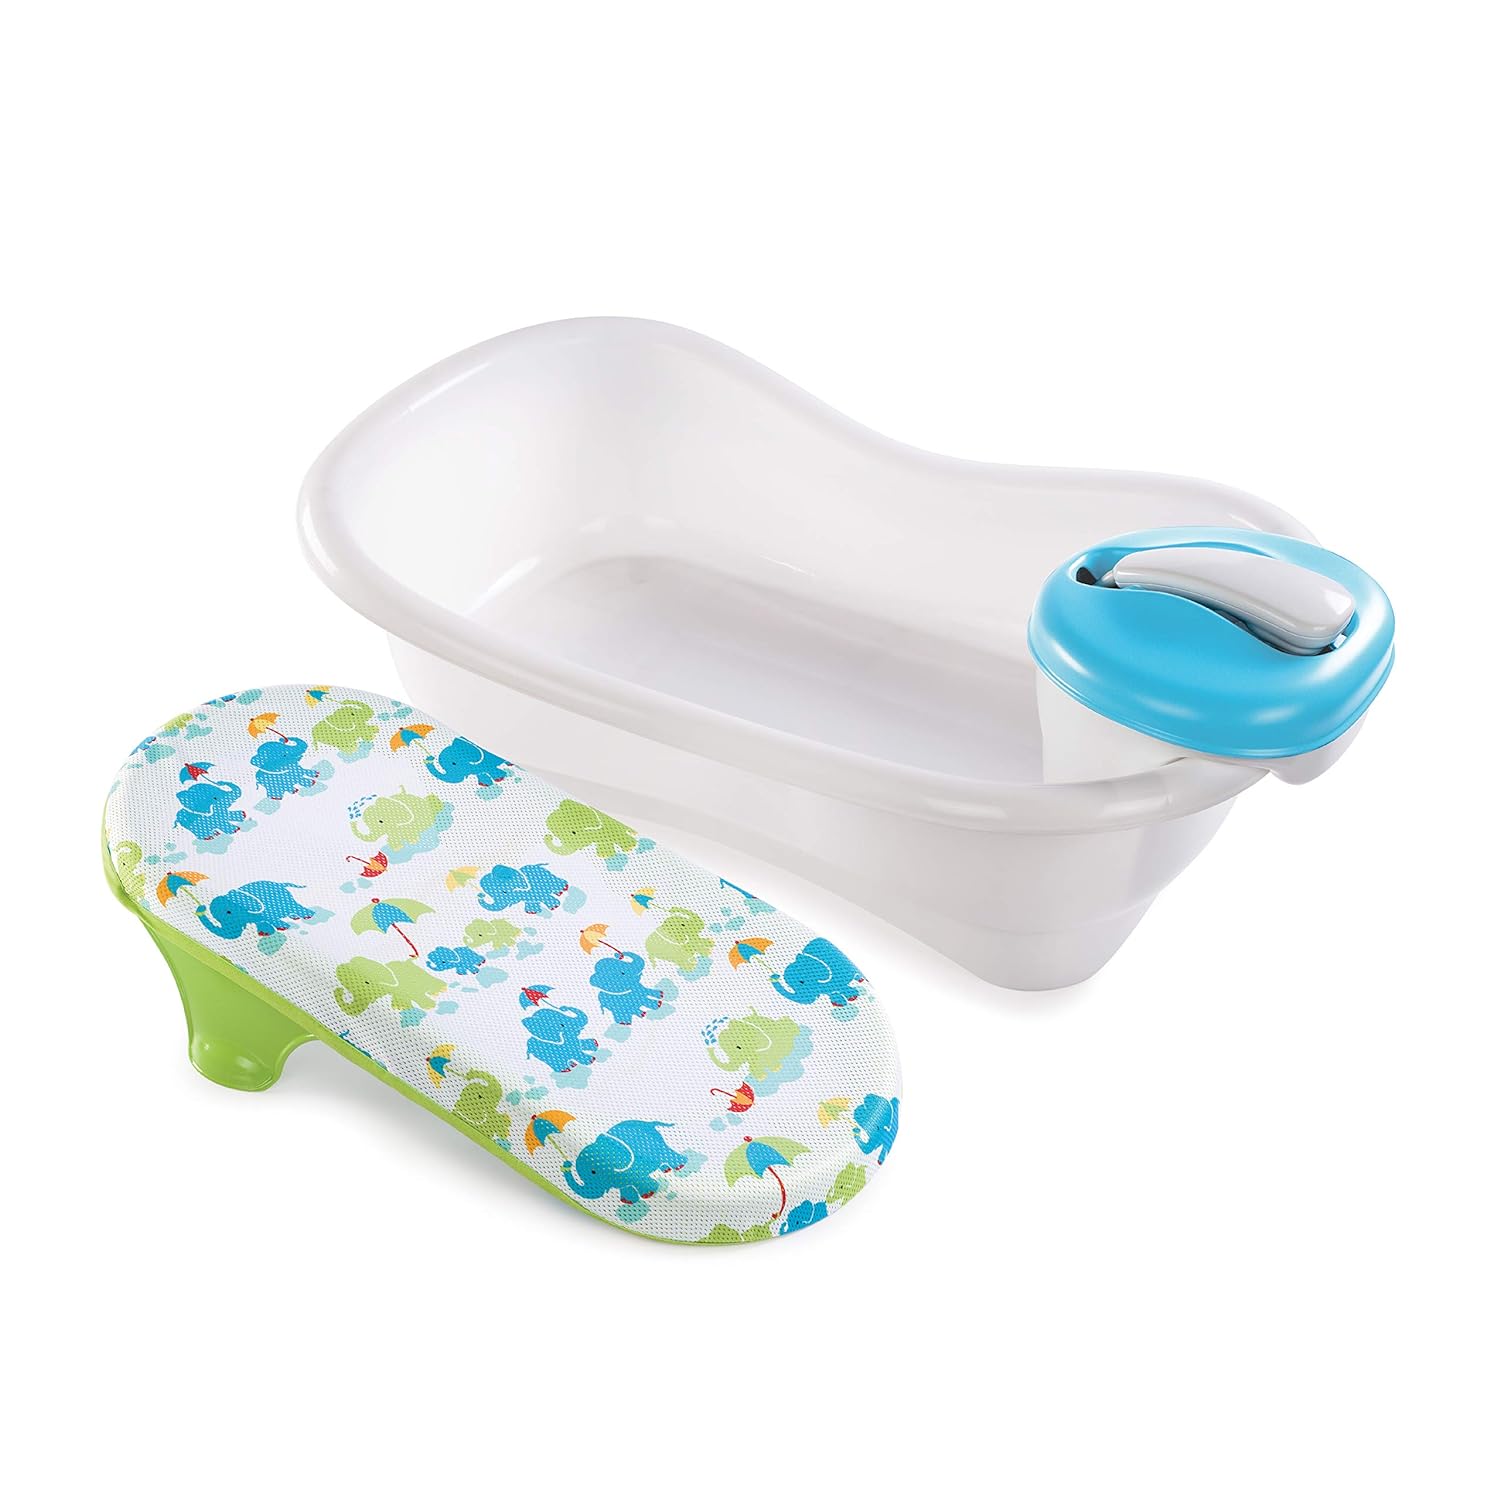 Summer Infant Newborn to Toddler Bath Center and Shower (Neutral) - Bathtub Includes Four Stages that Grow with Your Child